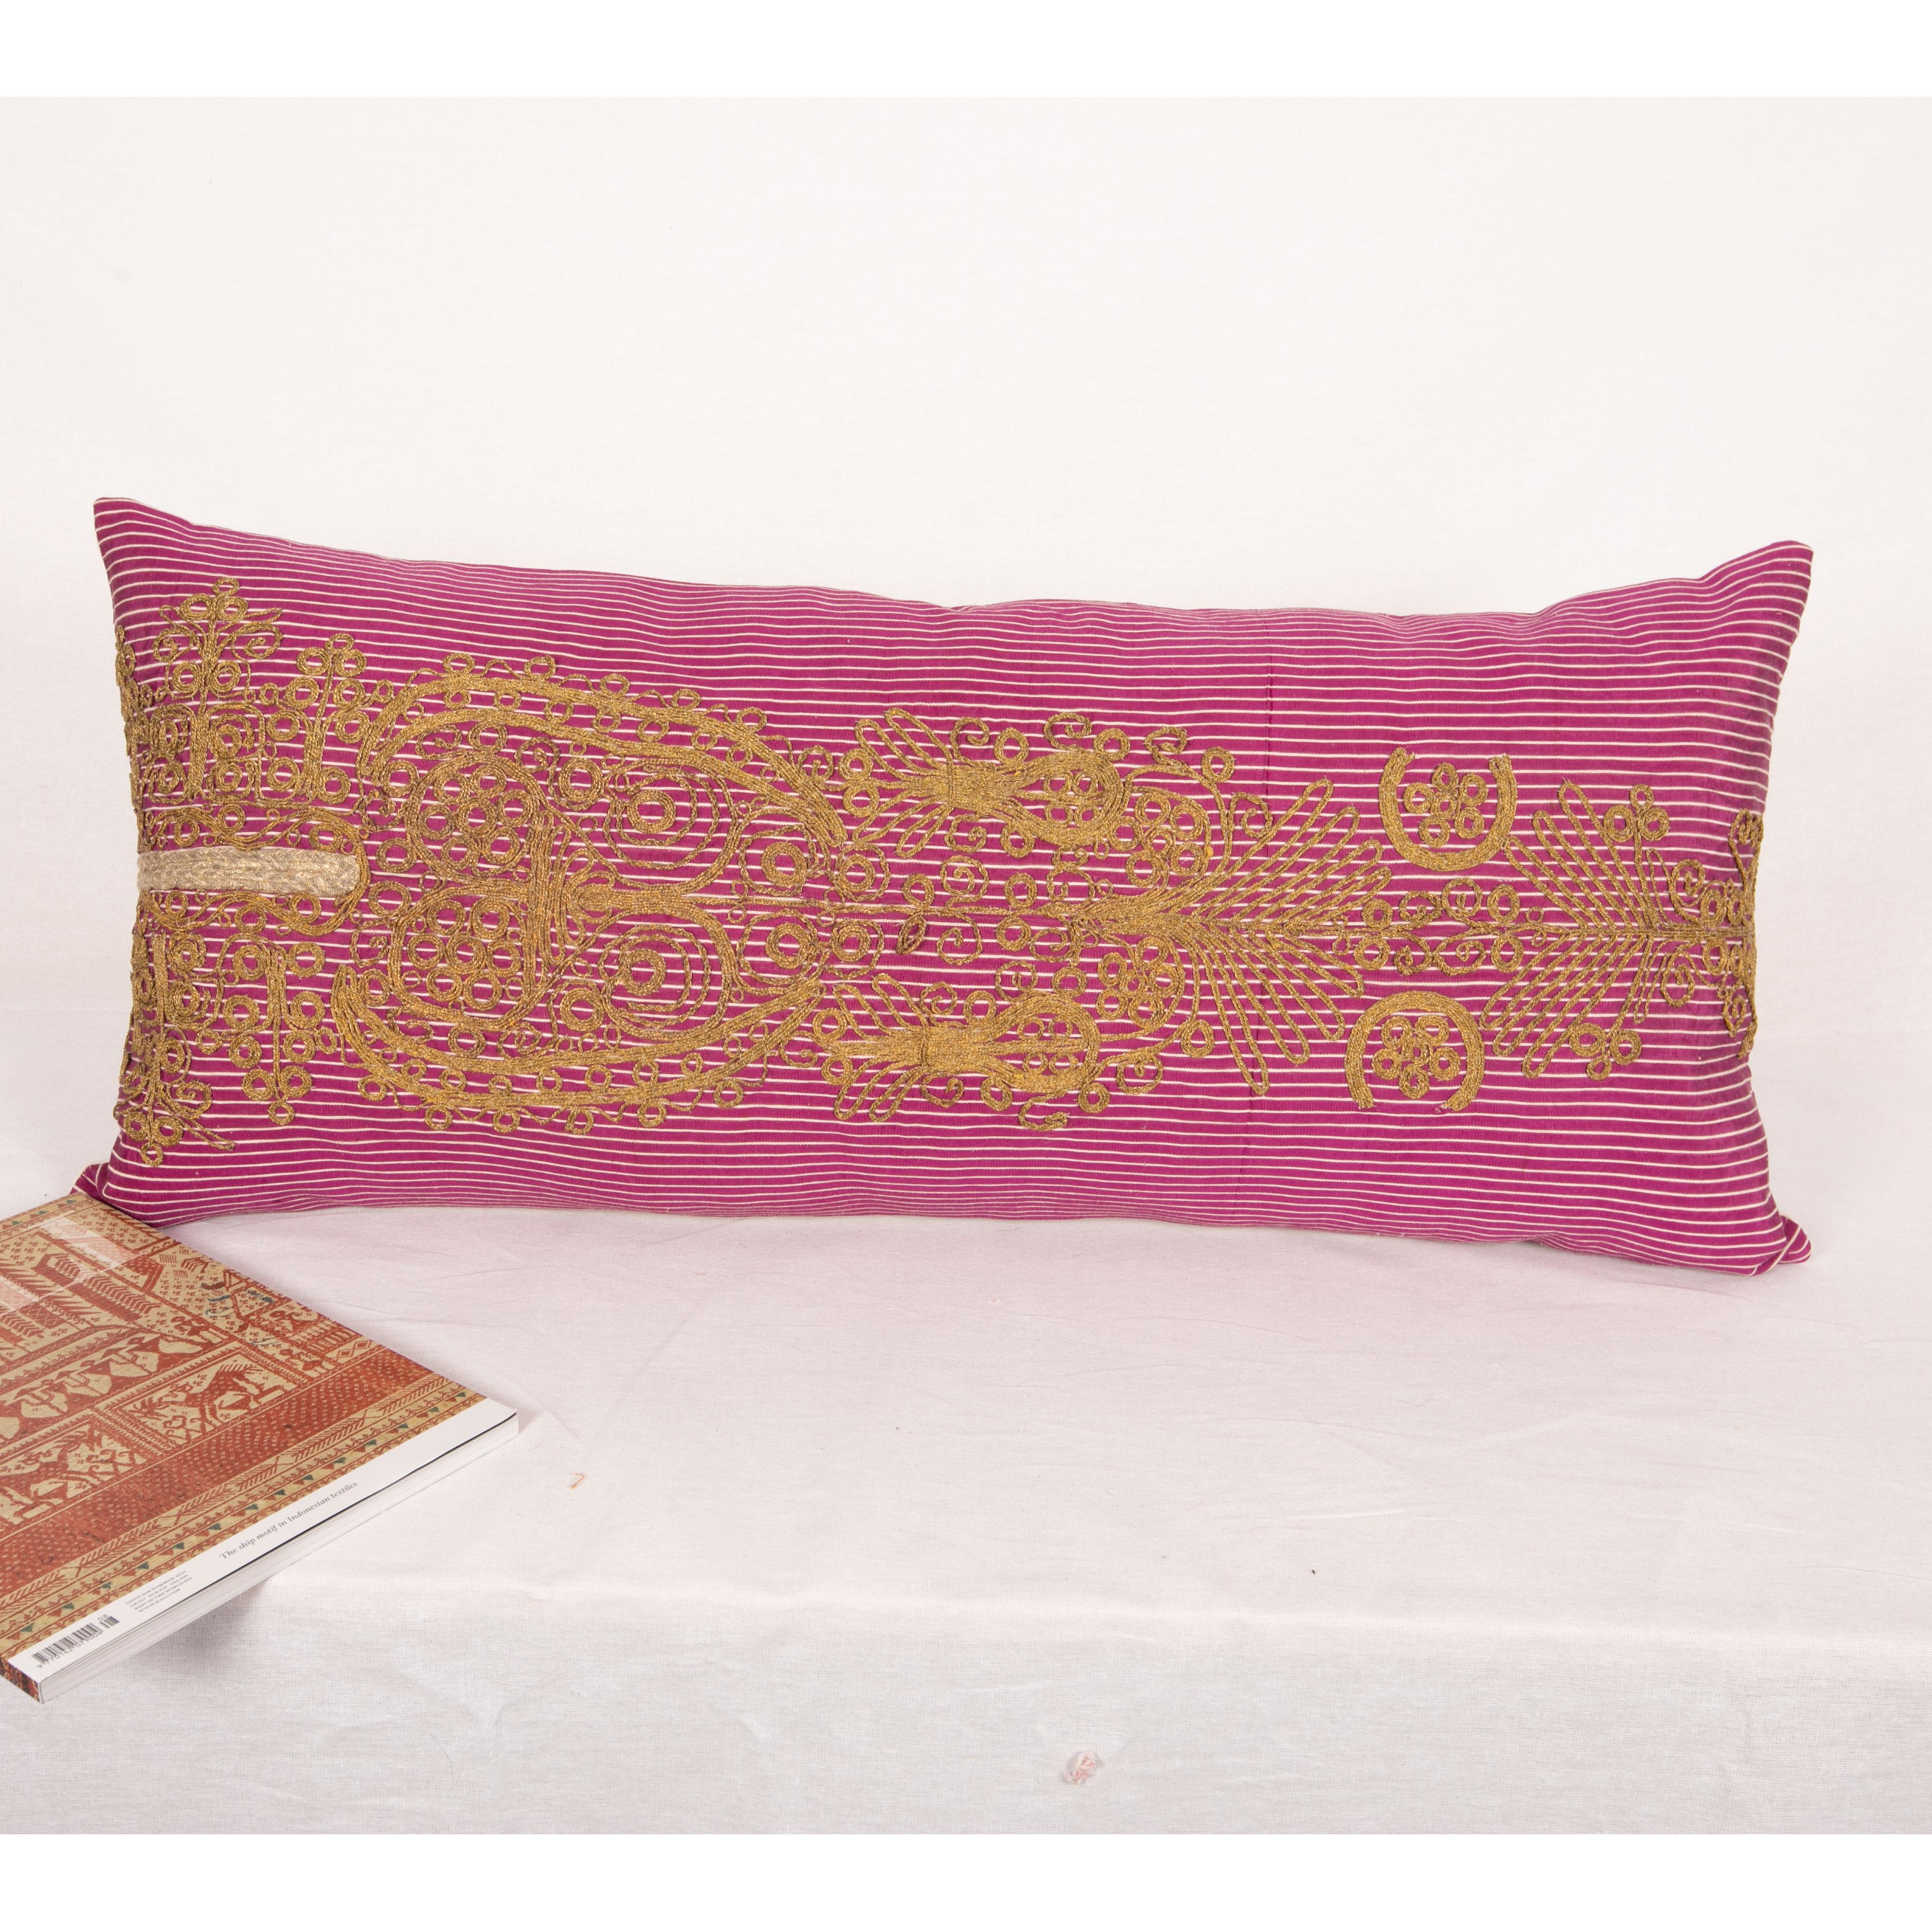 20th Century Antique Ottoman Turkish Pillow Case, Early 20th C.